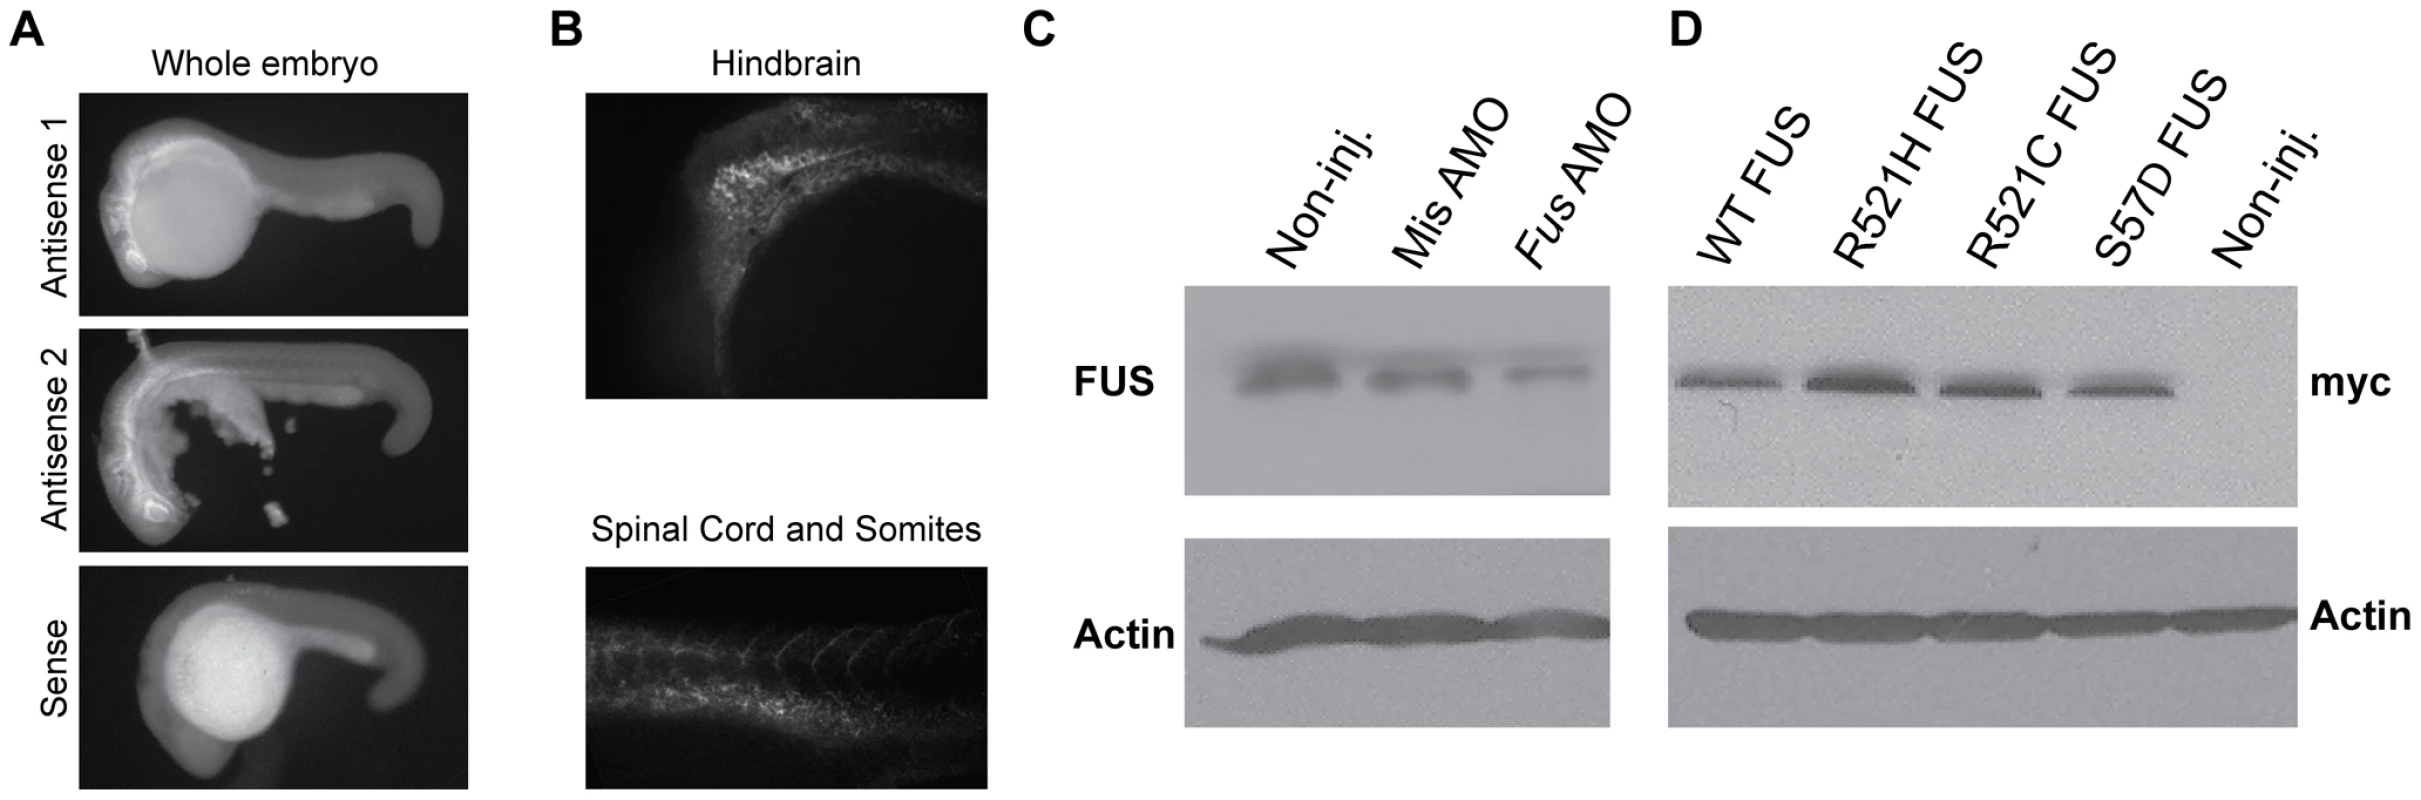 <i>Fus</i> mRNA expression in early development of zebrafish and Fus levels are reduced upon KD with a specific AMO.